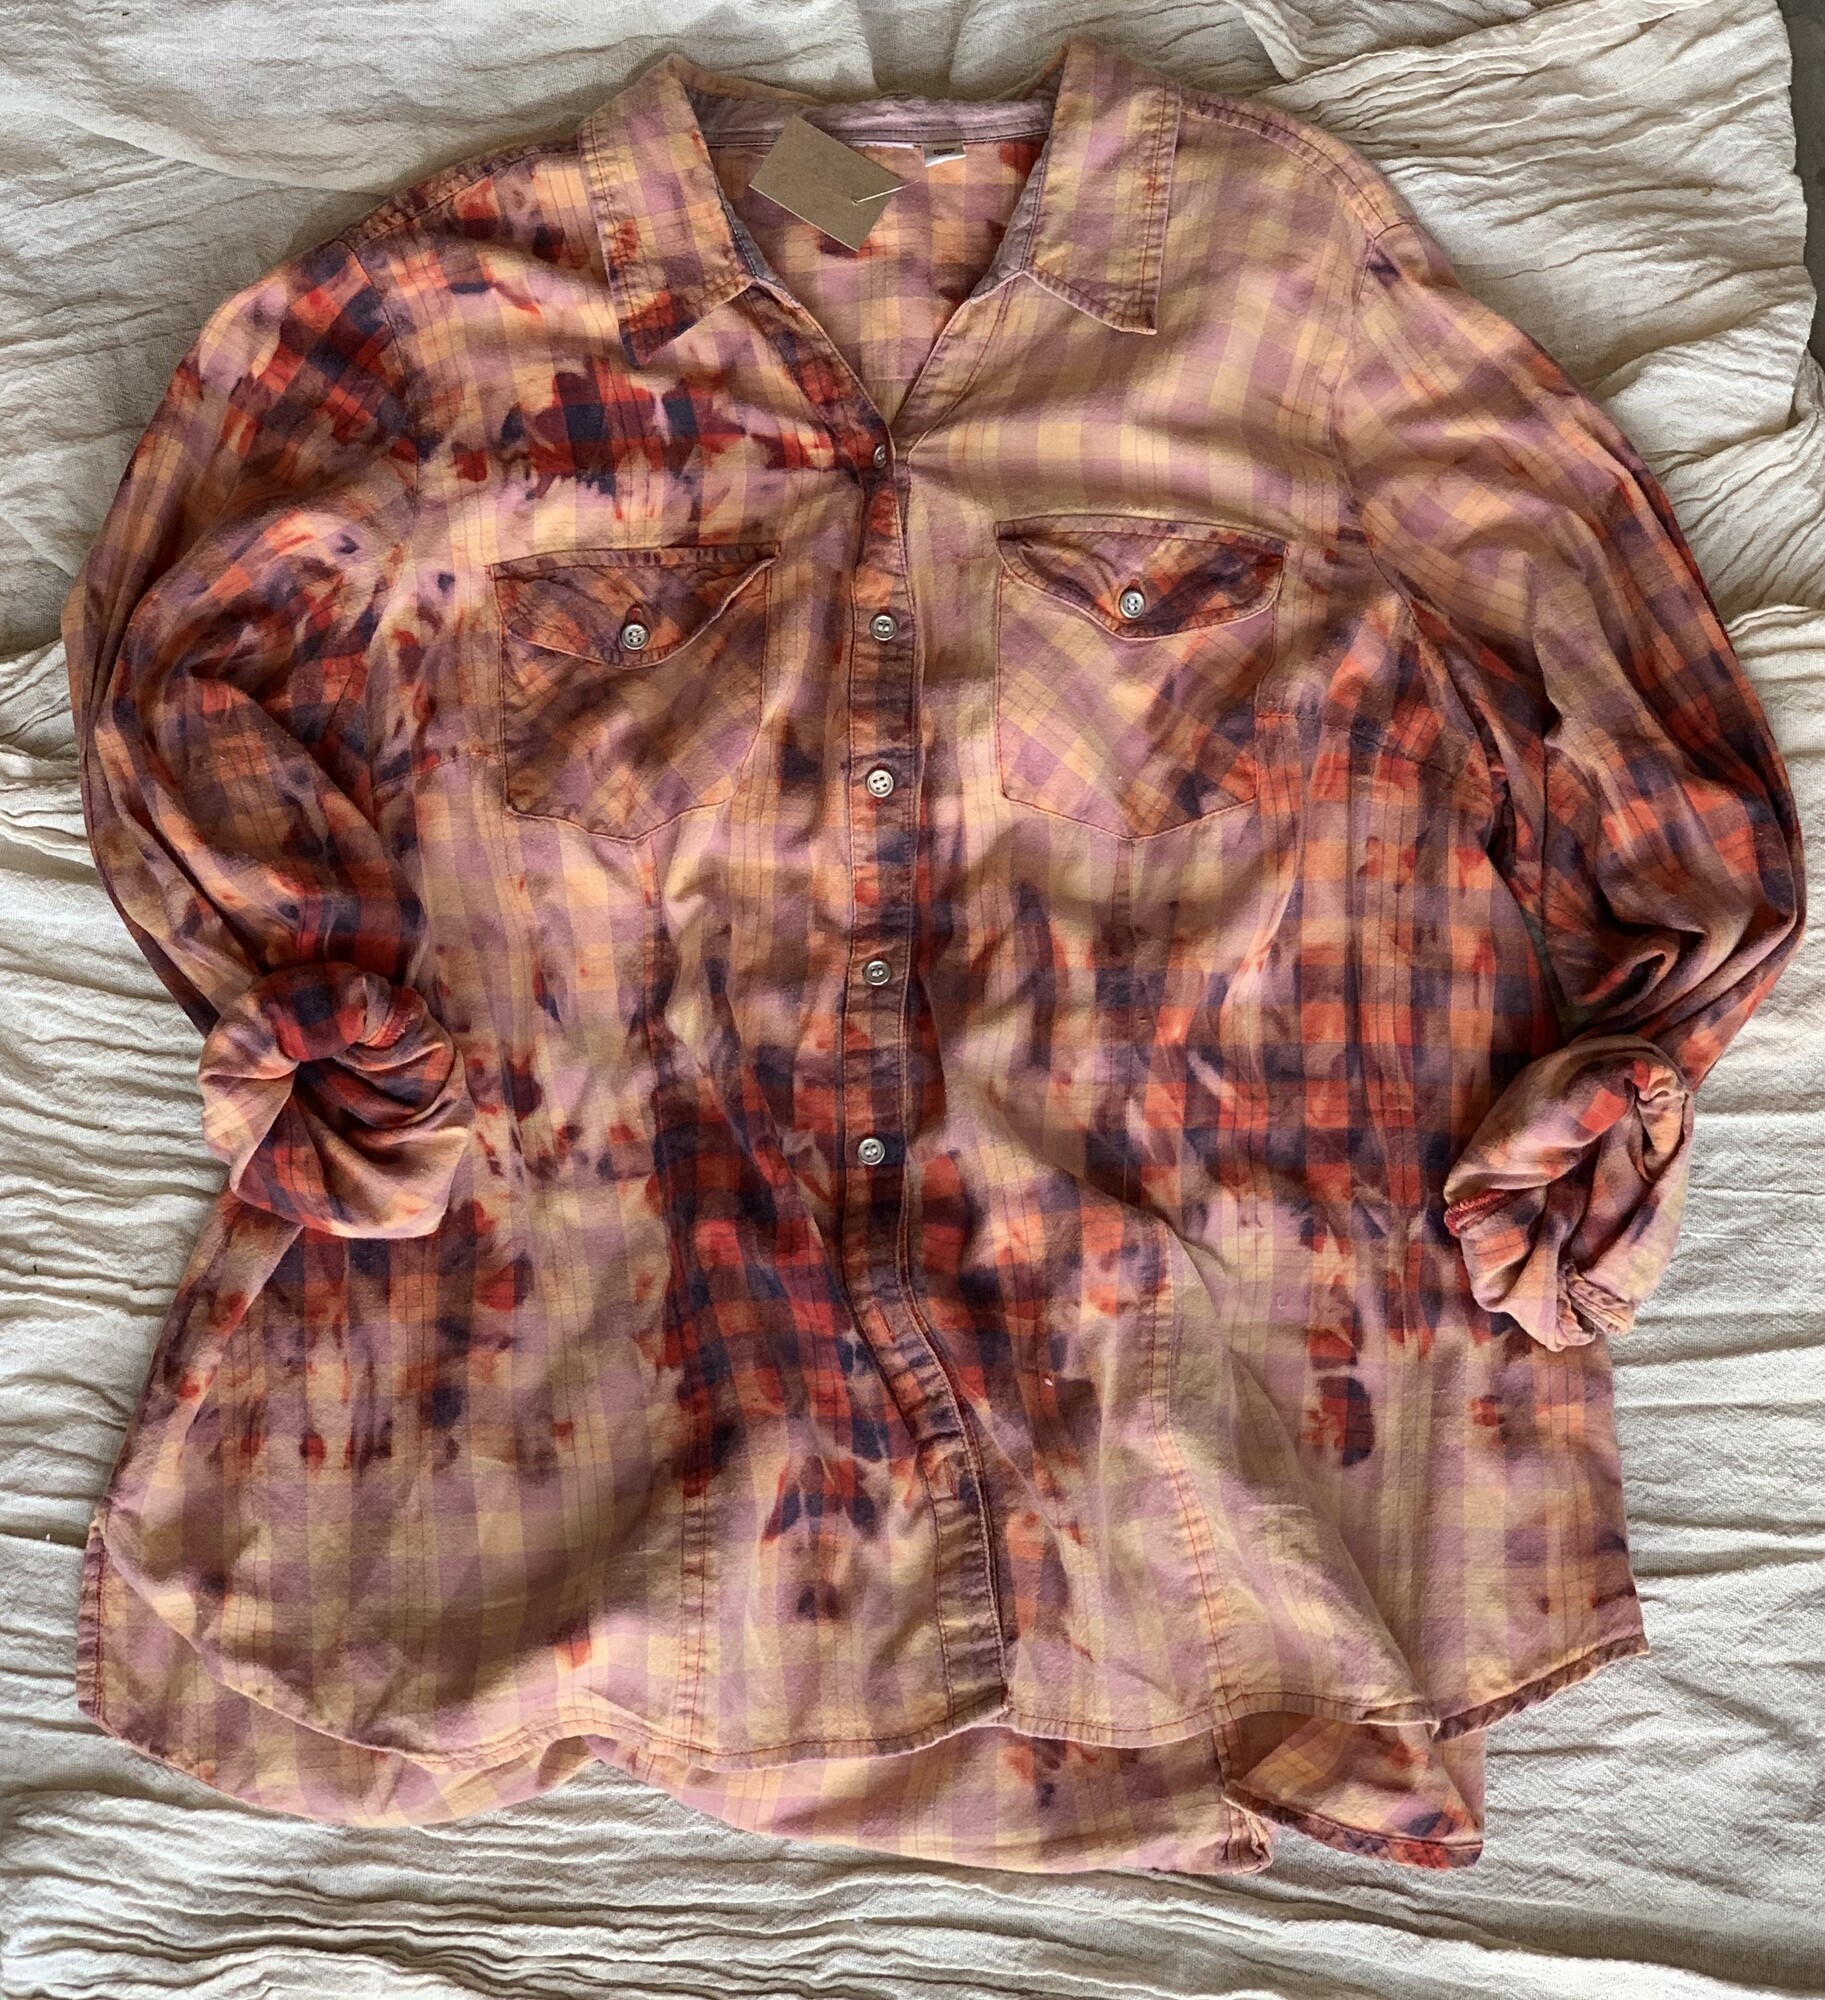 This gorgeous shirt by Kelli Hawk Designs is a loose fitting medium!